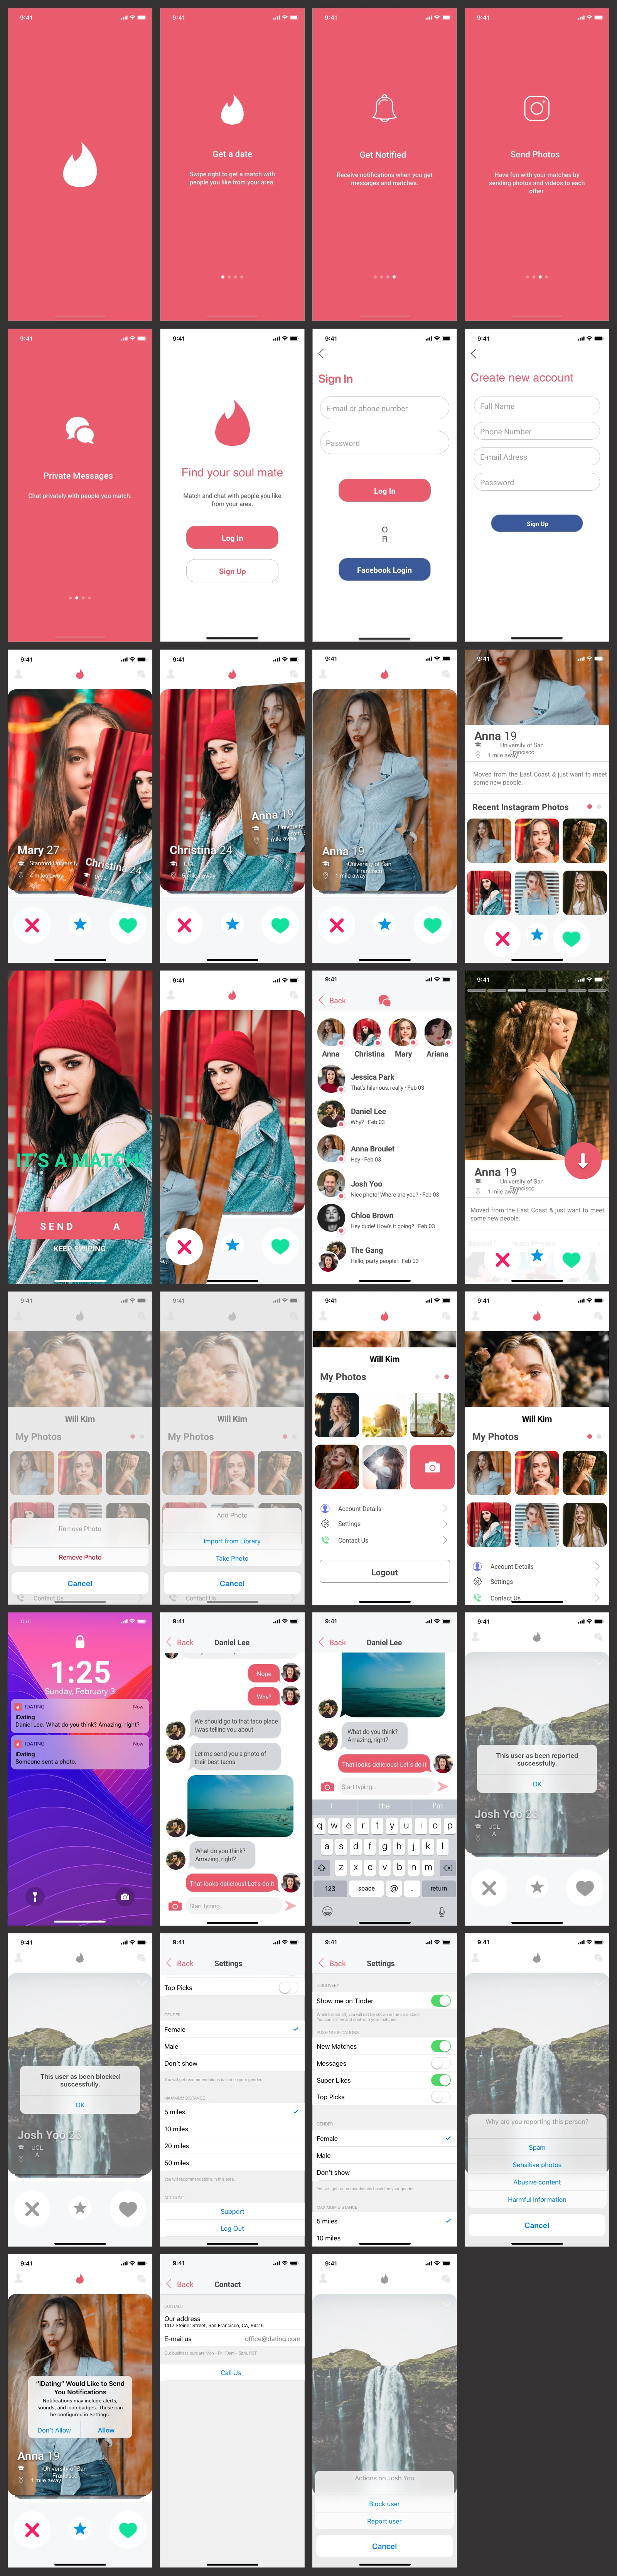 Dating App UI Kit for Sketch - Free dating app design UI kit in Sketch, to fast track the design of your next mobile dating app. With beautiful UI elements and a well thought out UX, this dating app contains more than 30 carefully crafted screens.